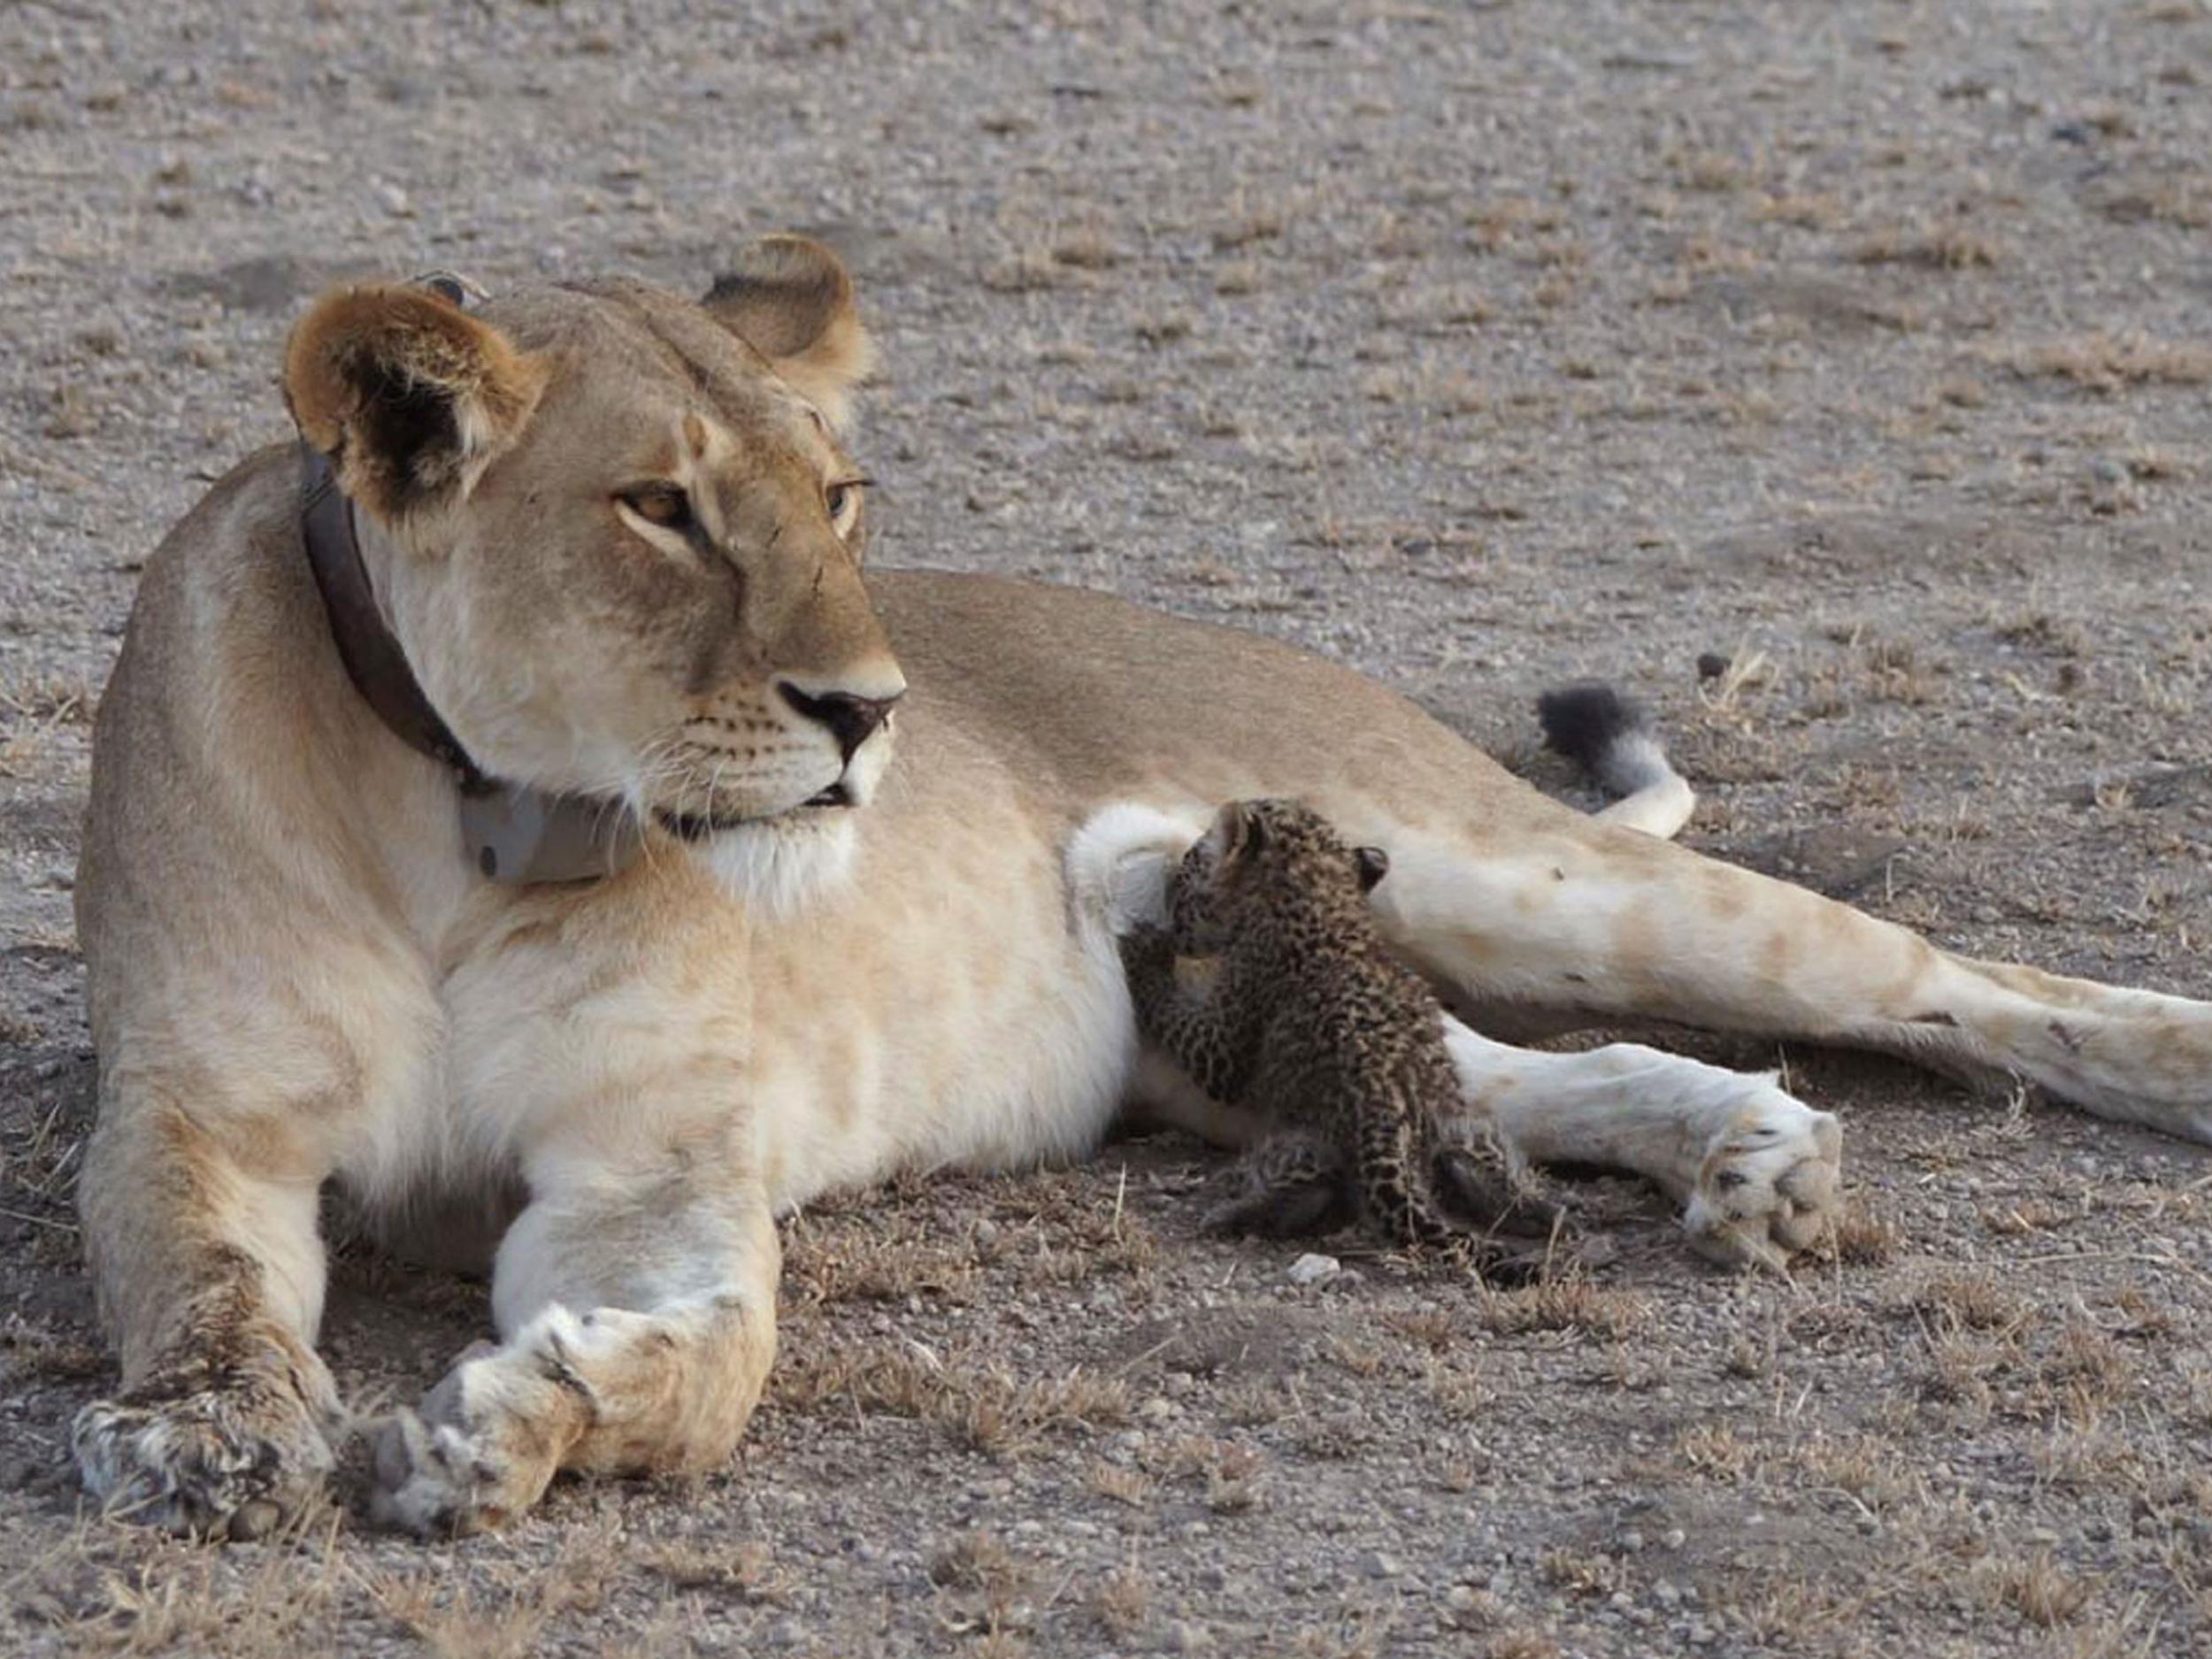 Nosikitok the lioness with the baby leopard